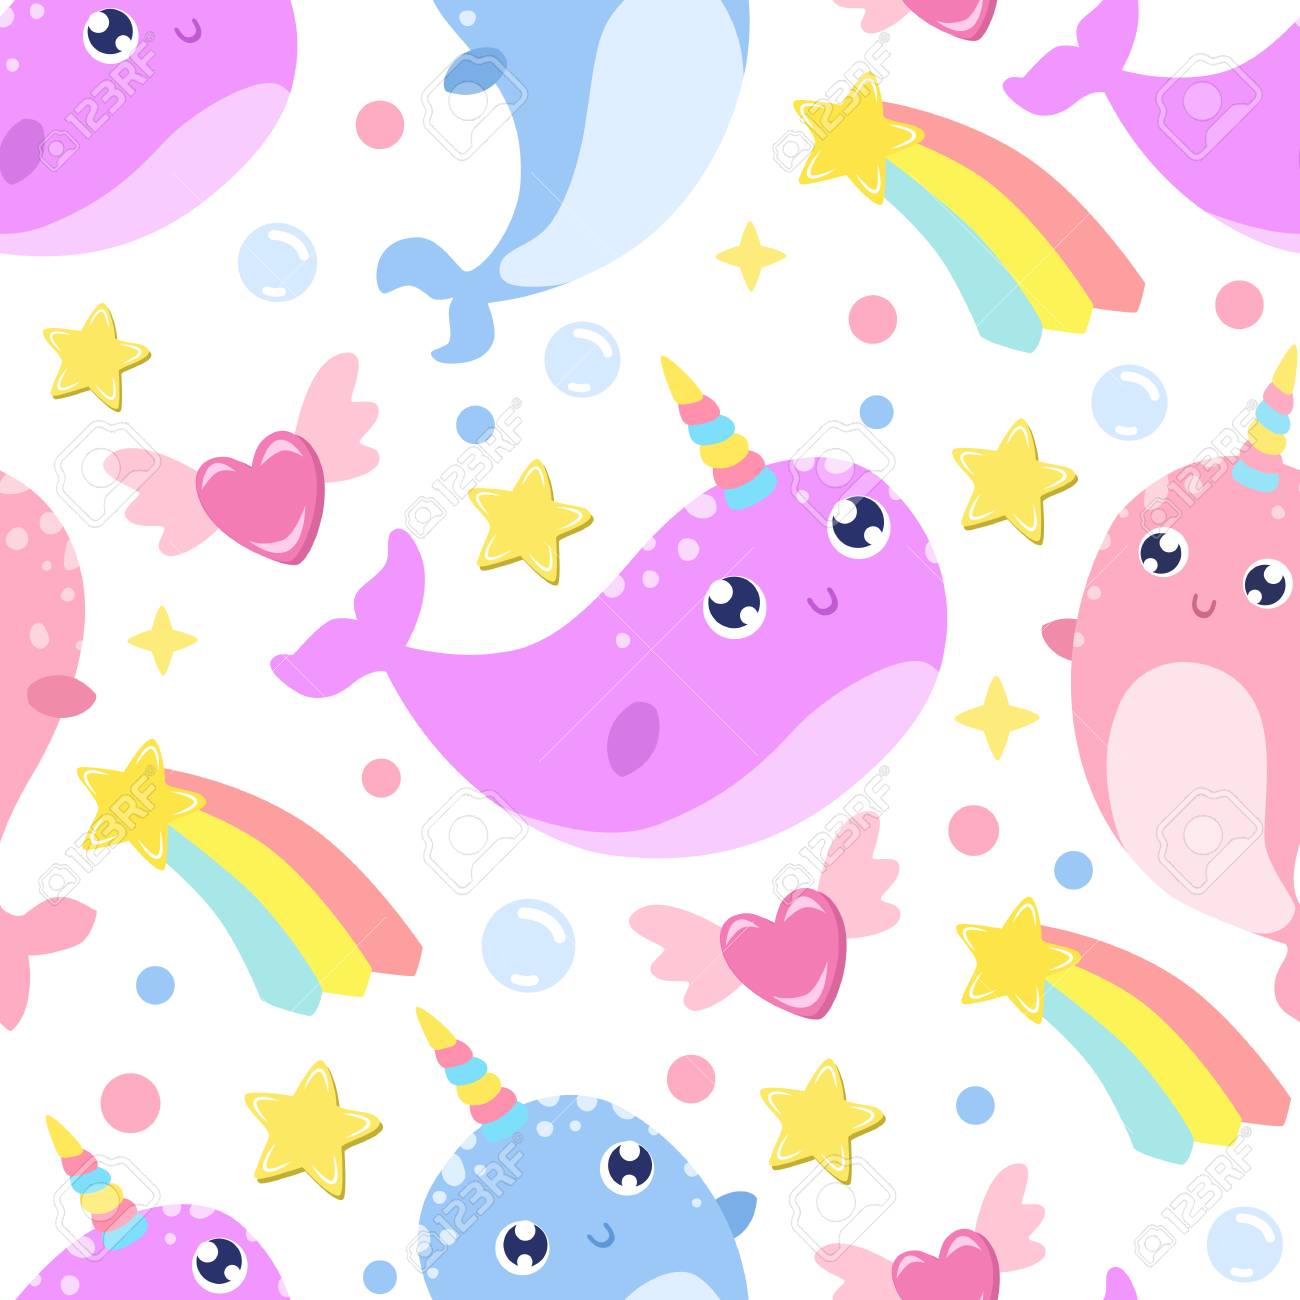 Free download Cute Cartoon Narwhal Seamless Background Royalty Free  Cliparts [1300x1300] for your Desktop, Mobile & Tablet | Explore 9+ Narwhal  Backgrounds | Cute Narwhal Wallpapers,